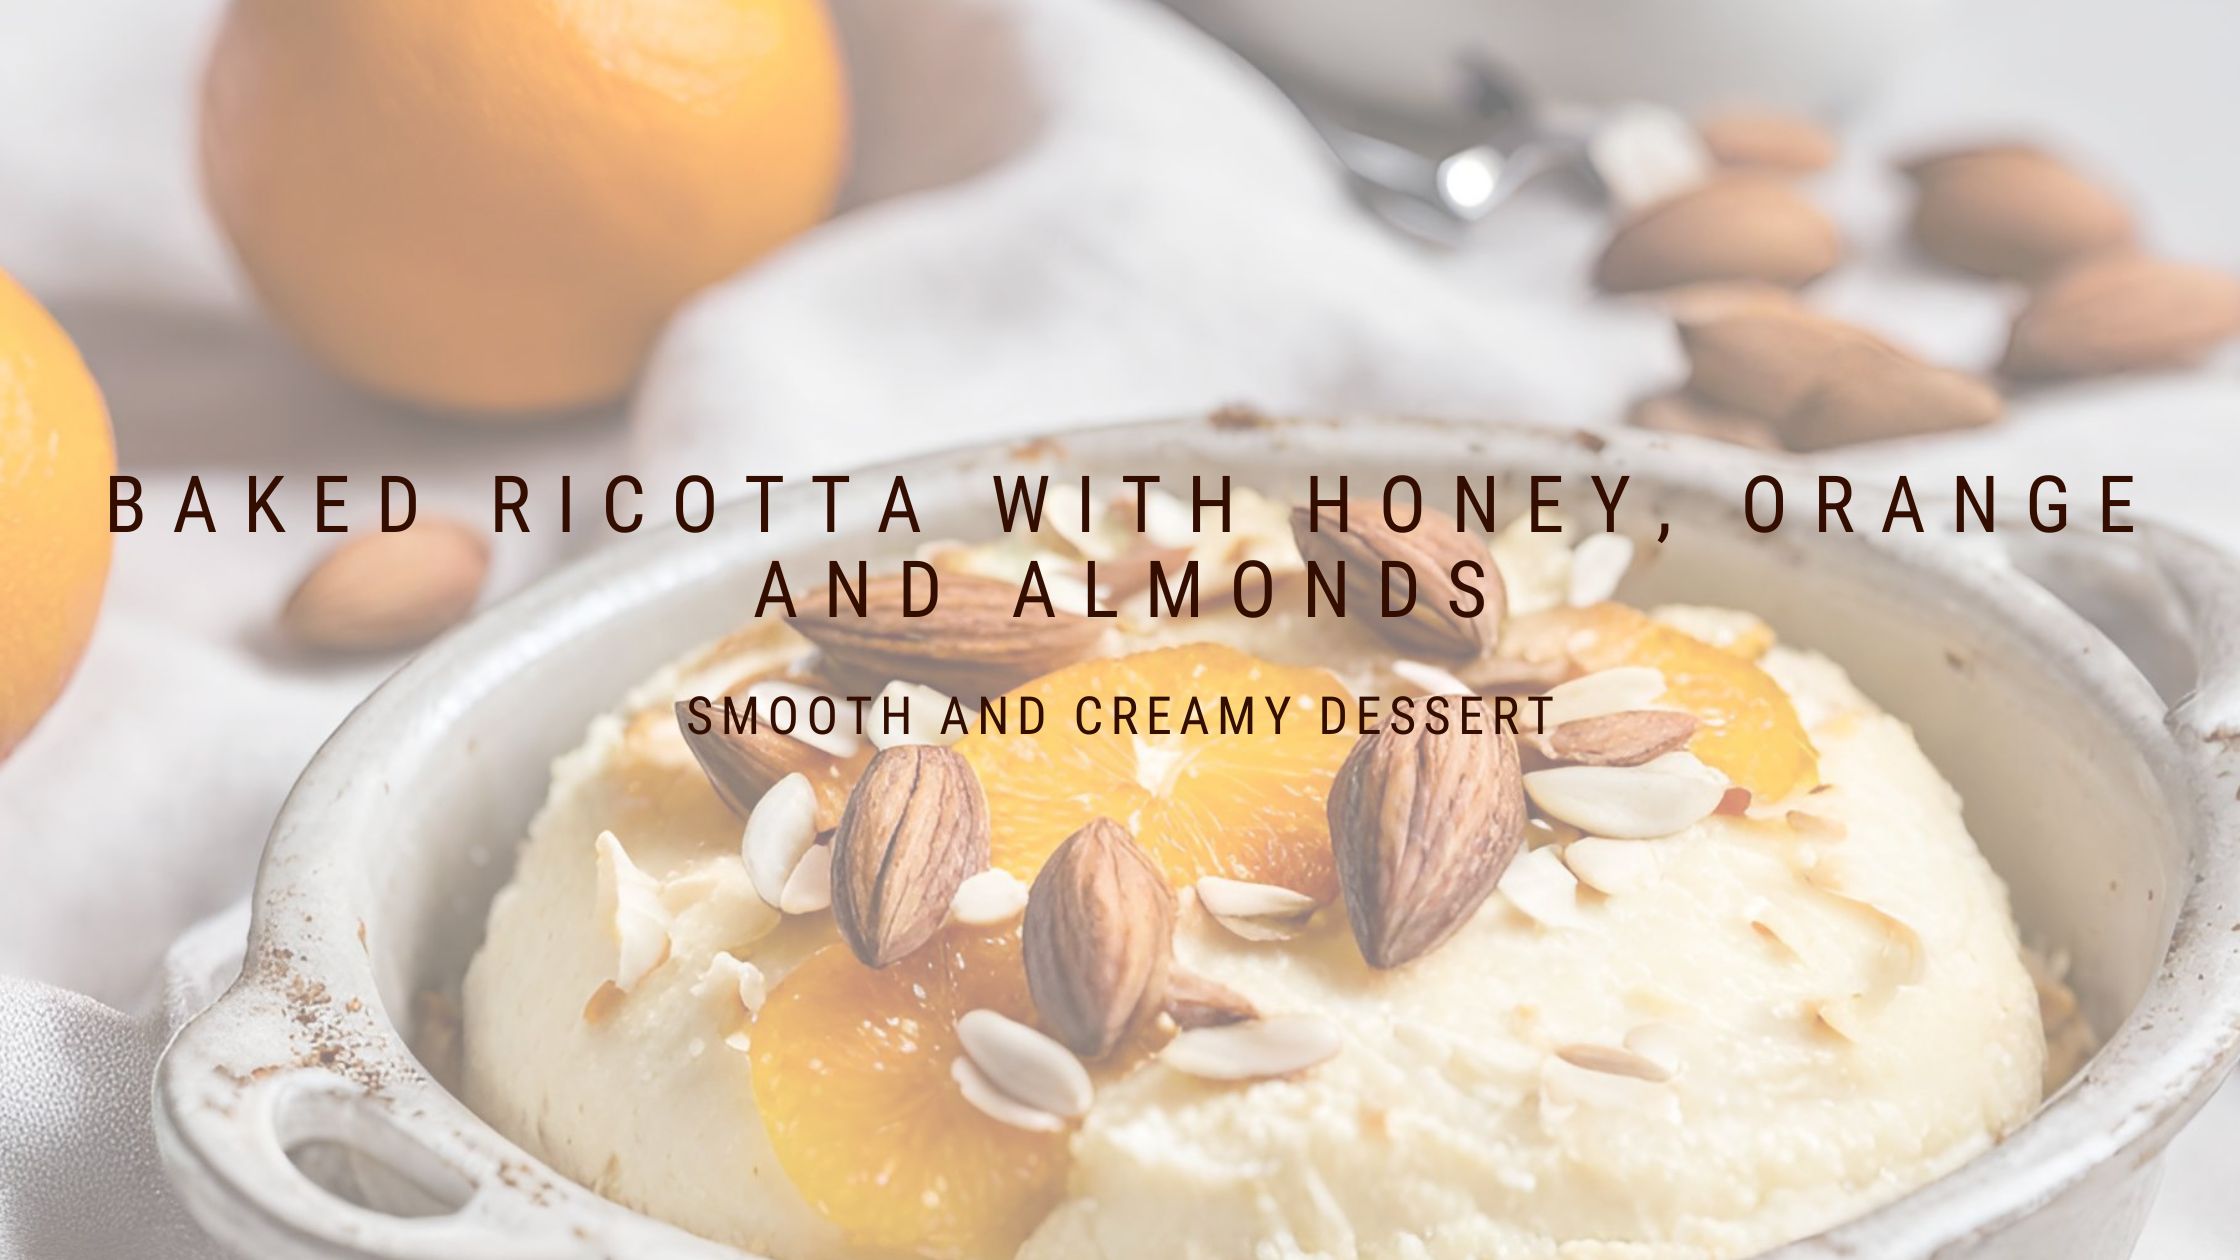 Baked Ricotta with Honey, Orange and Almonds